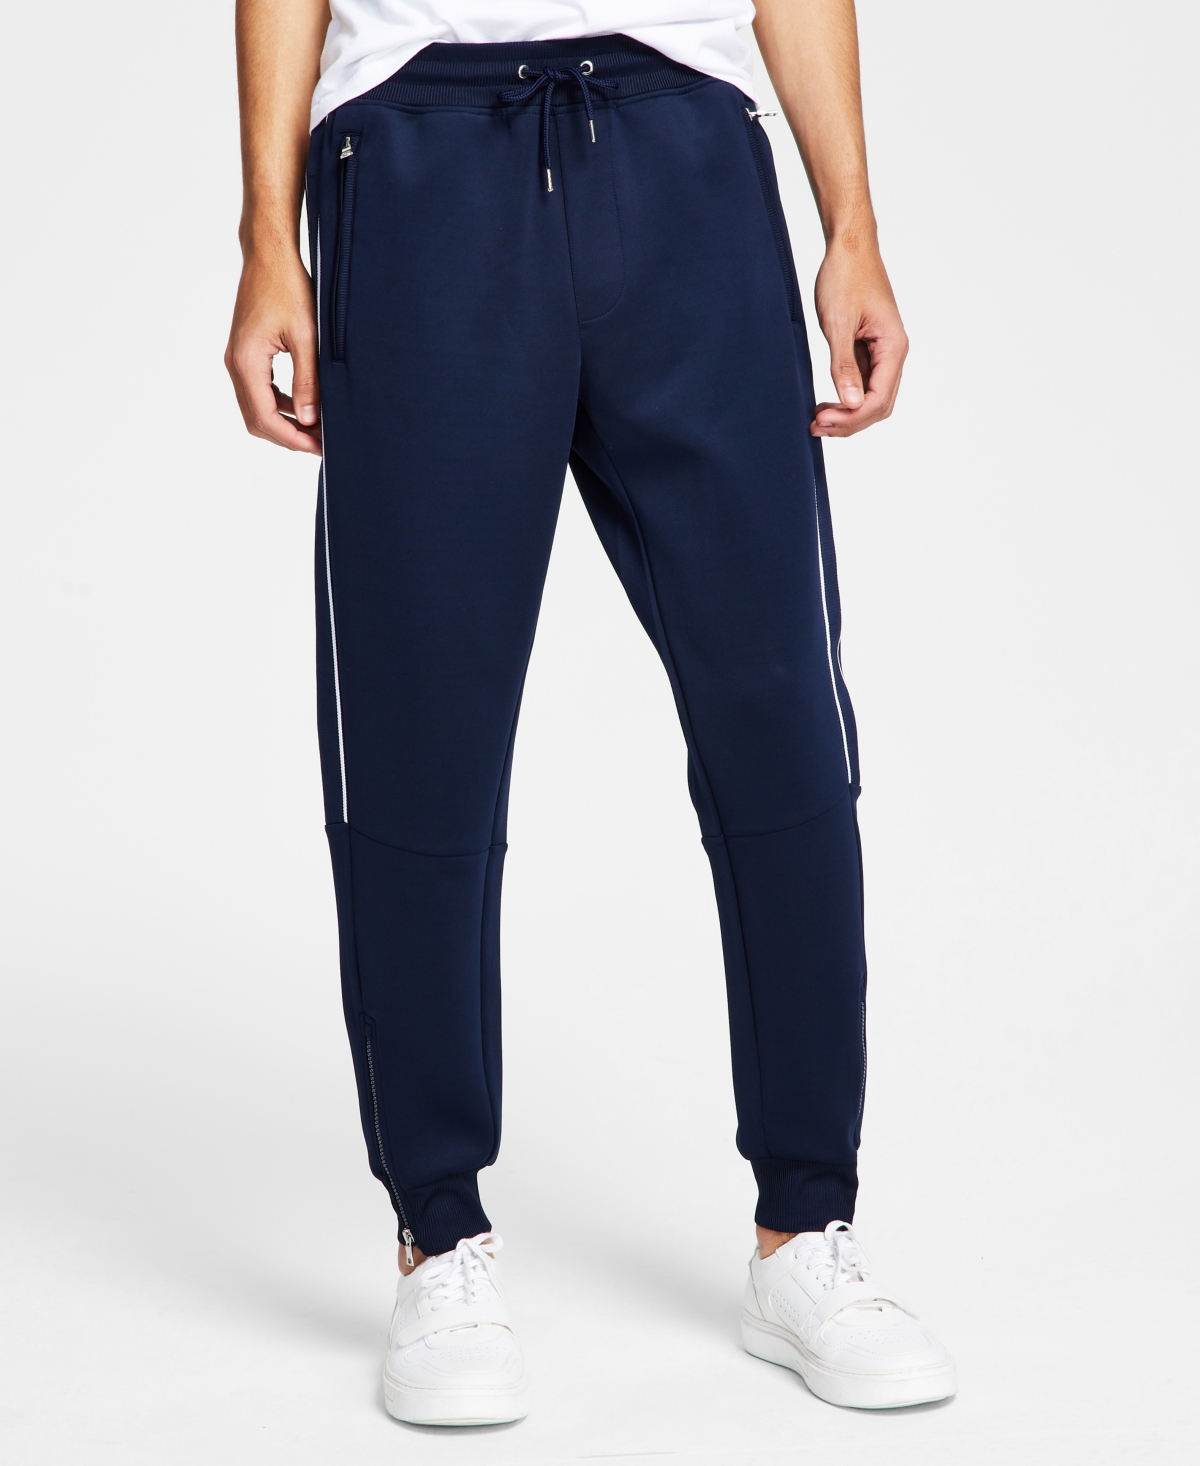 Inc International Concepts Utility Jogger Pants, Created for Macy's